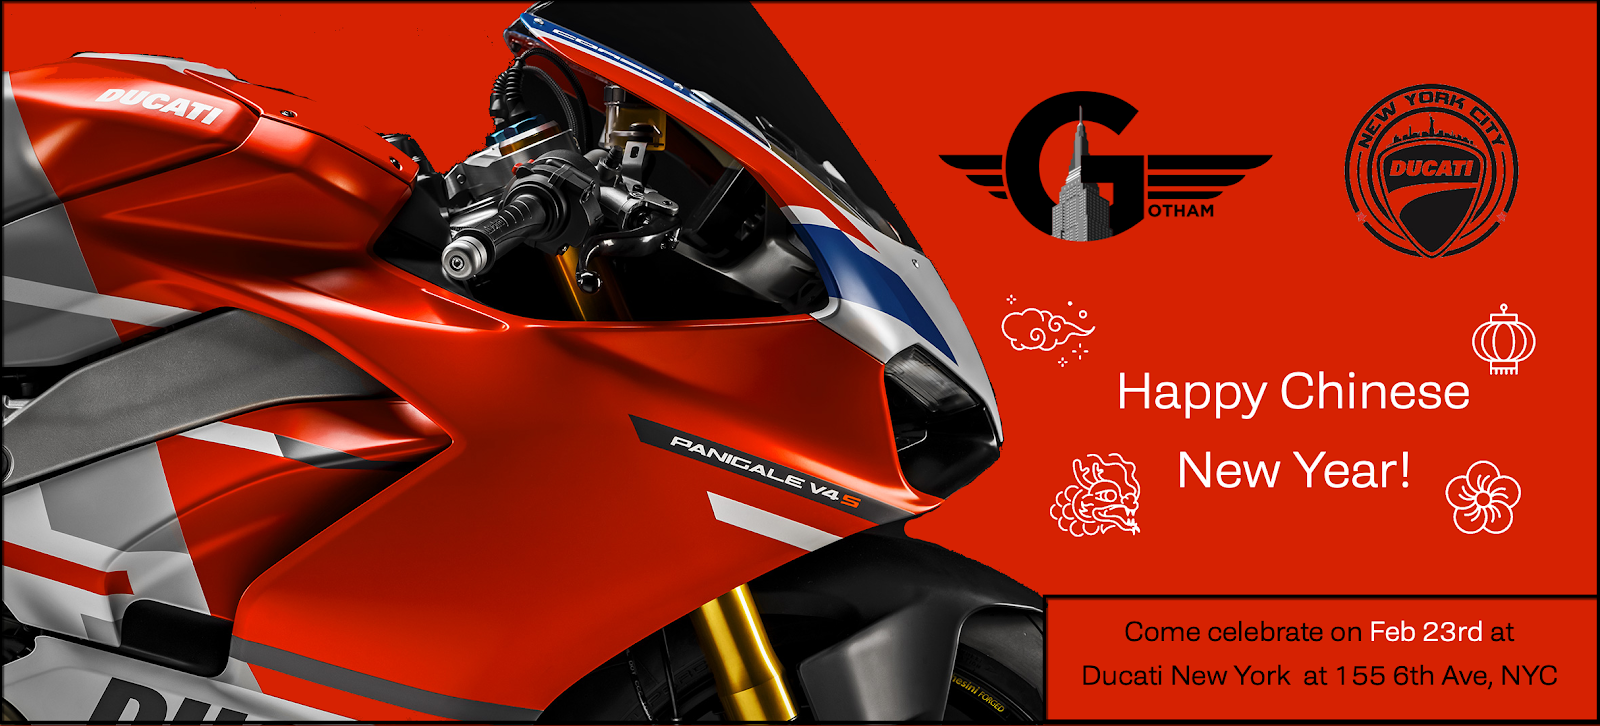 Gotham Ducati Desmo Owners Club Happy Chinese New Year 2019